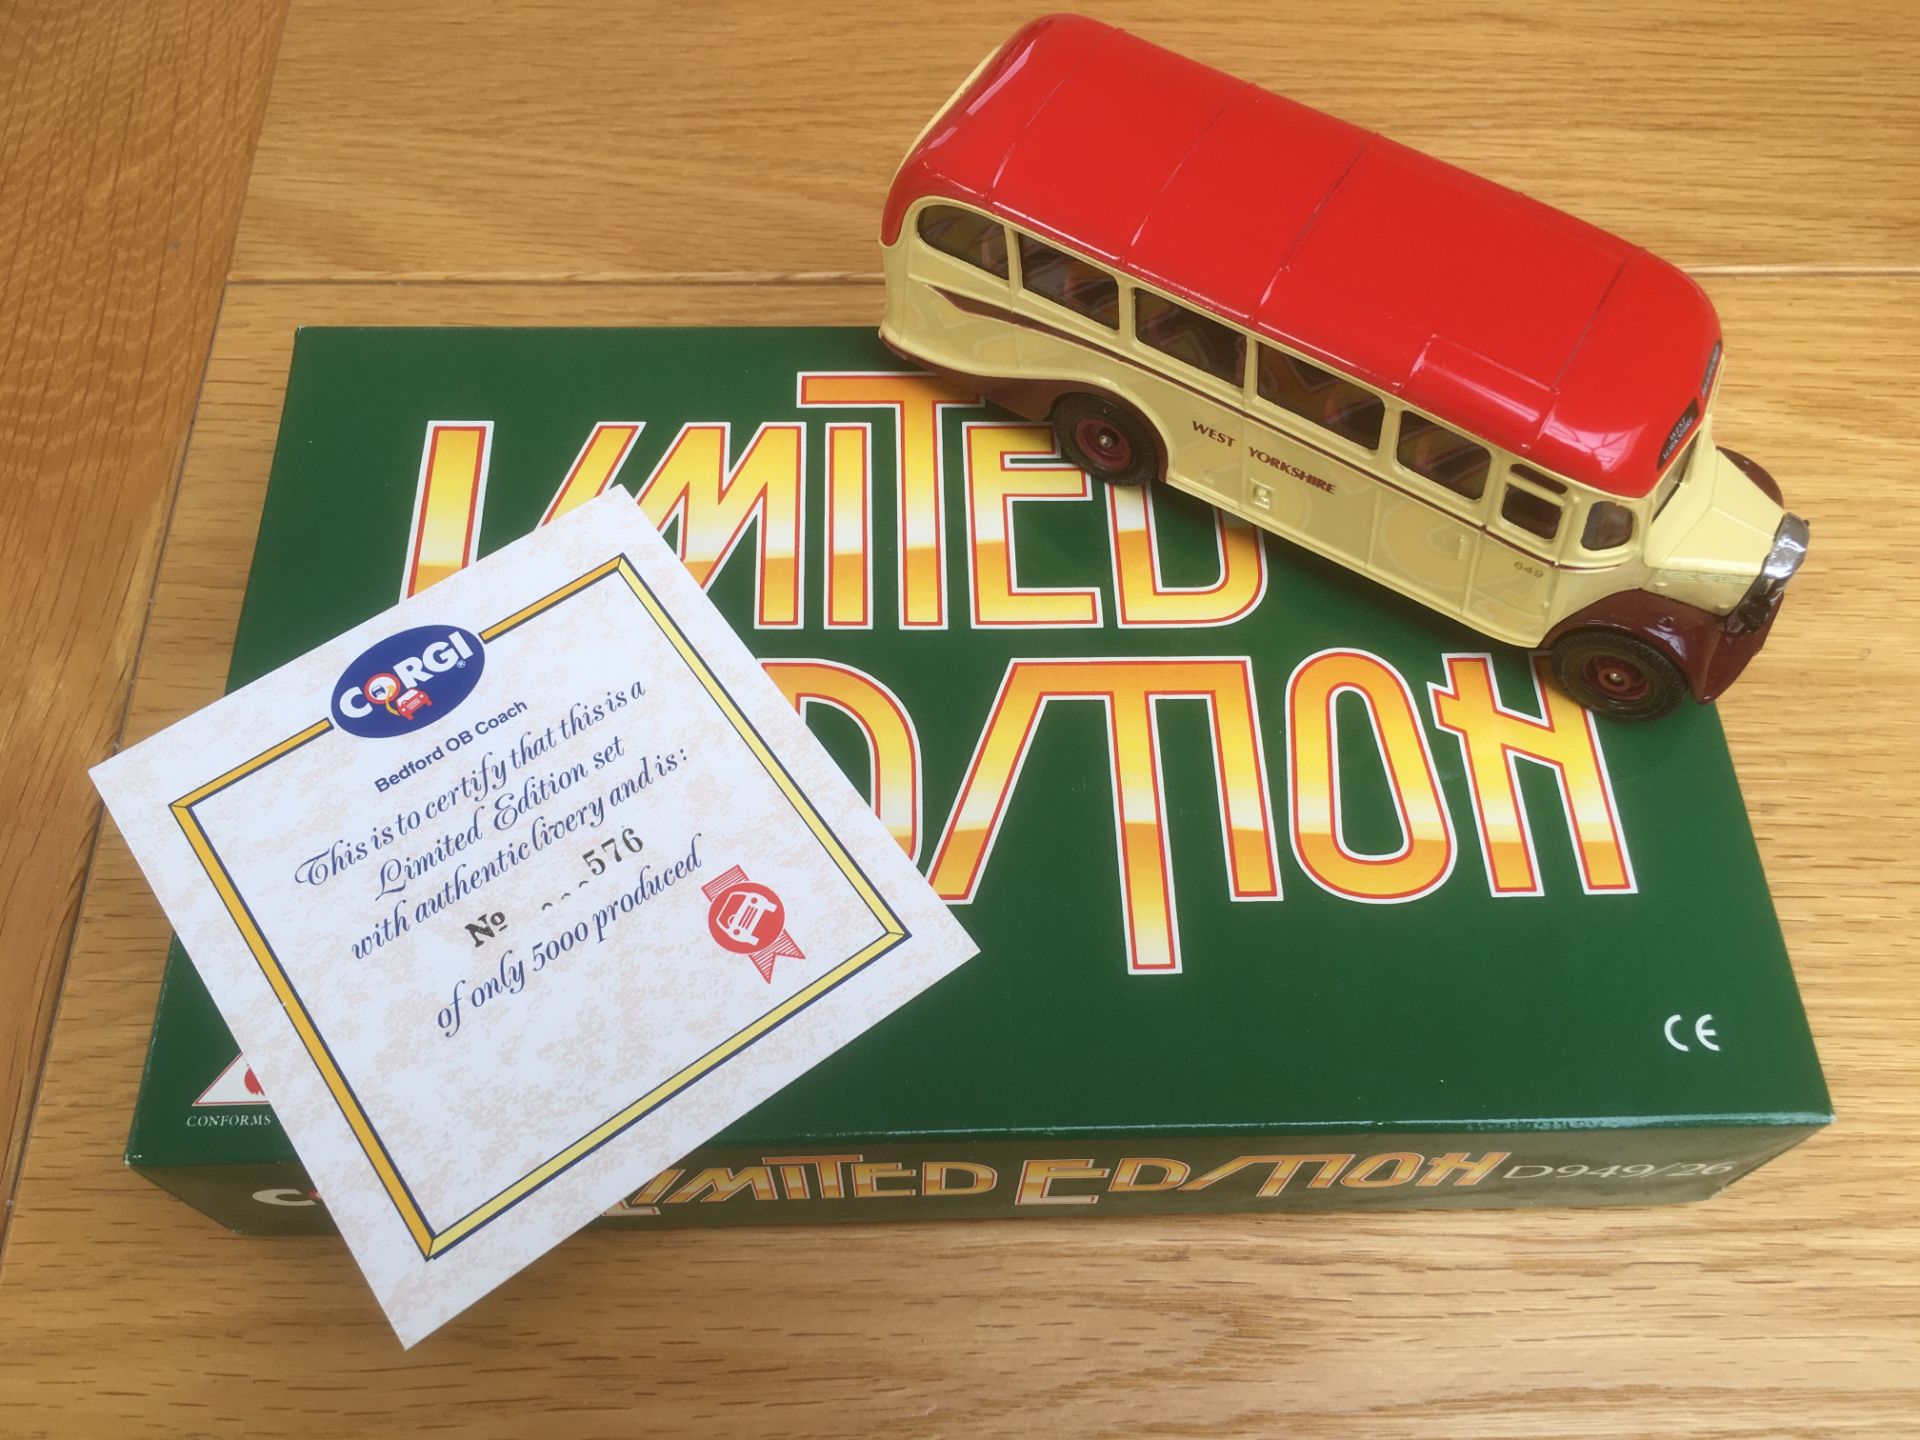 Limited Edition Corgi Bedford OB Coach West Yorkshire - D949/26 - Image 6 of 8